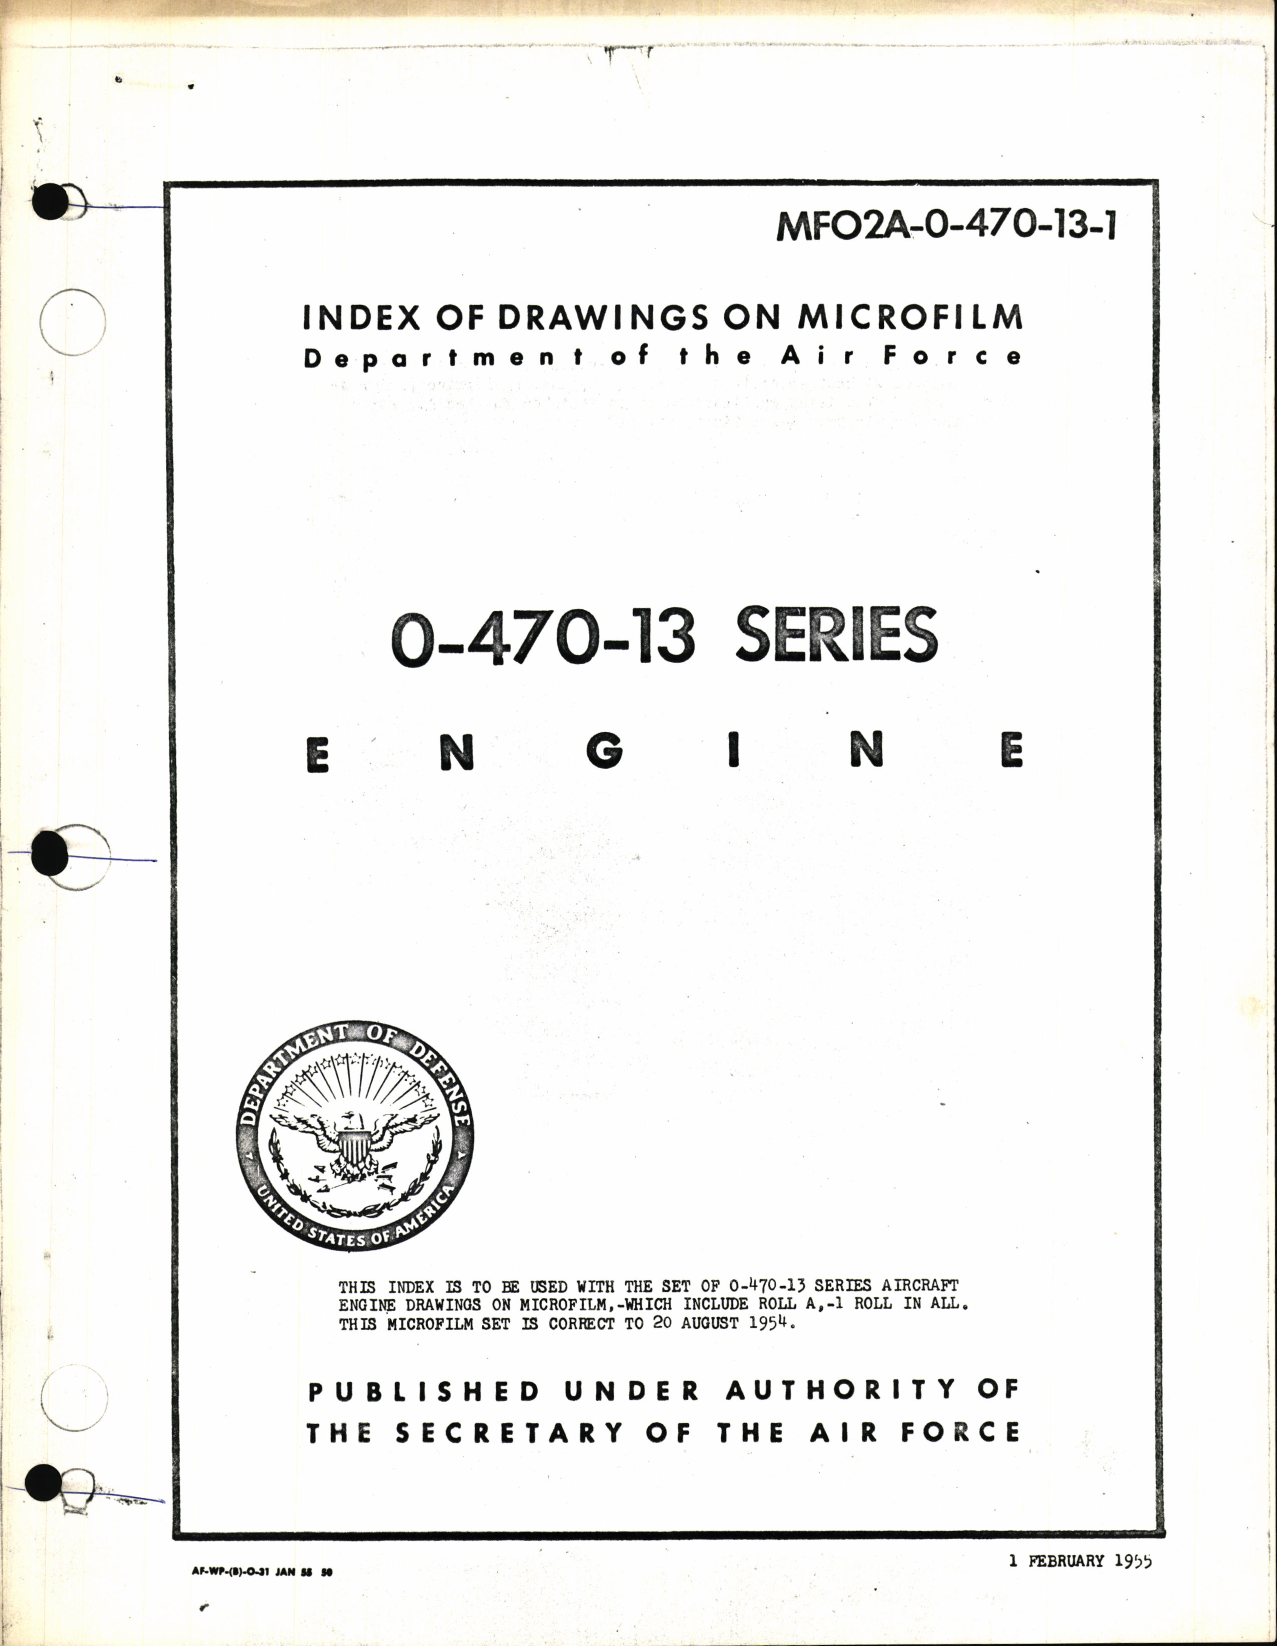 Sample page 1 from AirCorps Library document: Index of Drawings on Microfilm 0-470-13 Series Engines